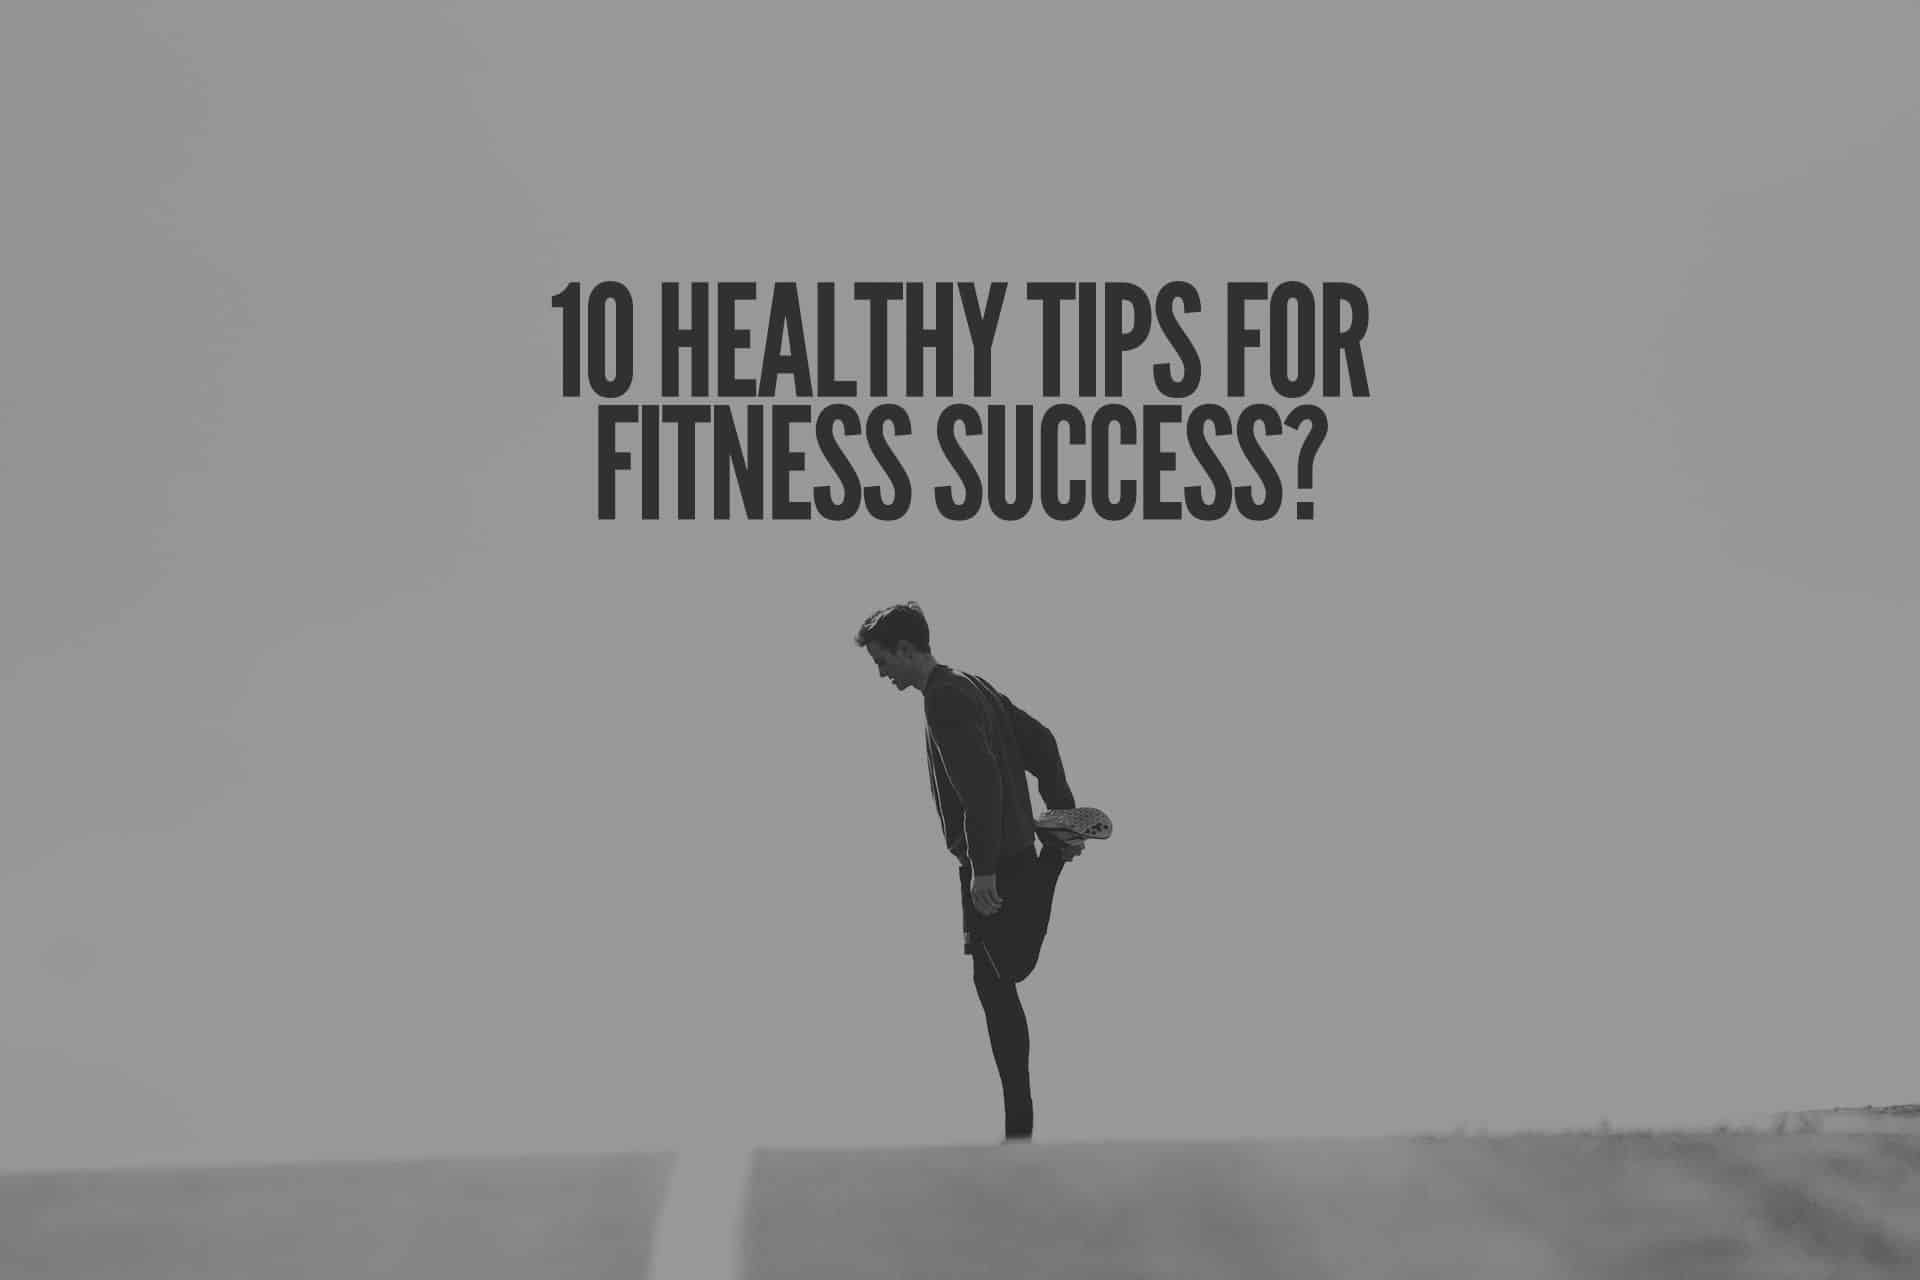 10 Healthy Tips for Fitness Success